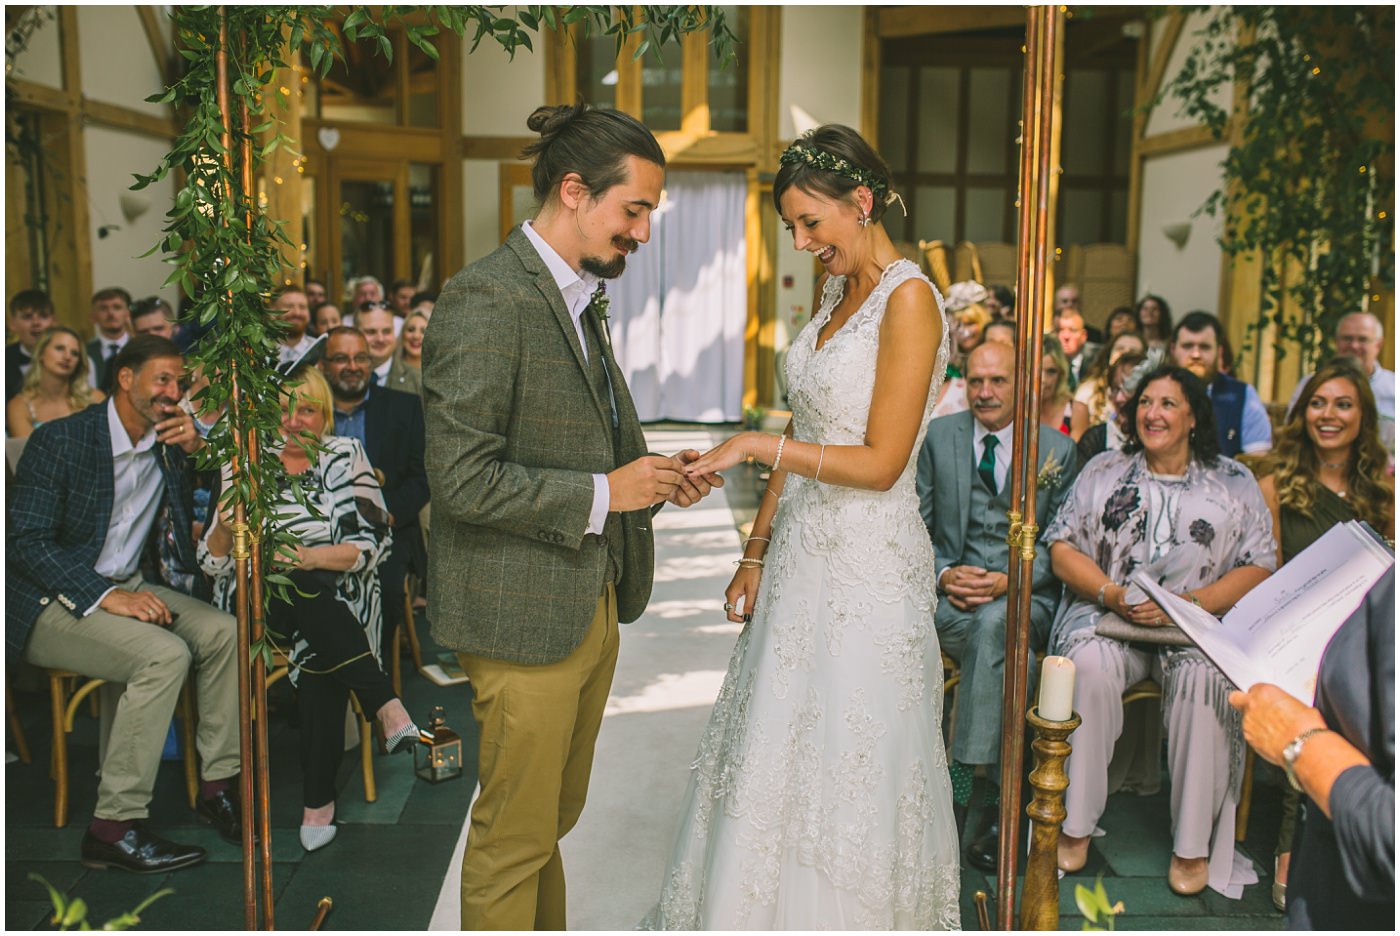 Groom exchanges rings with his bride during knutsford wedding